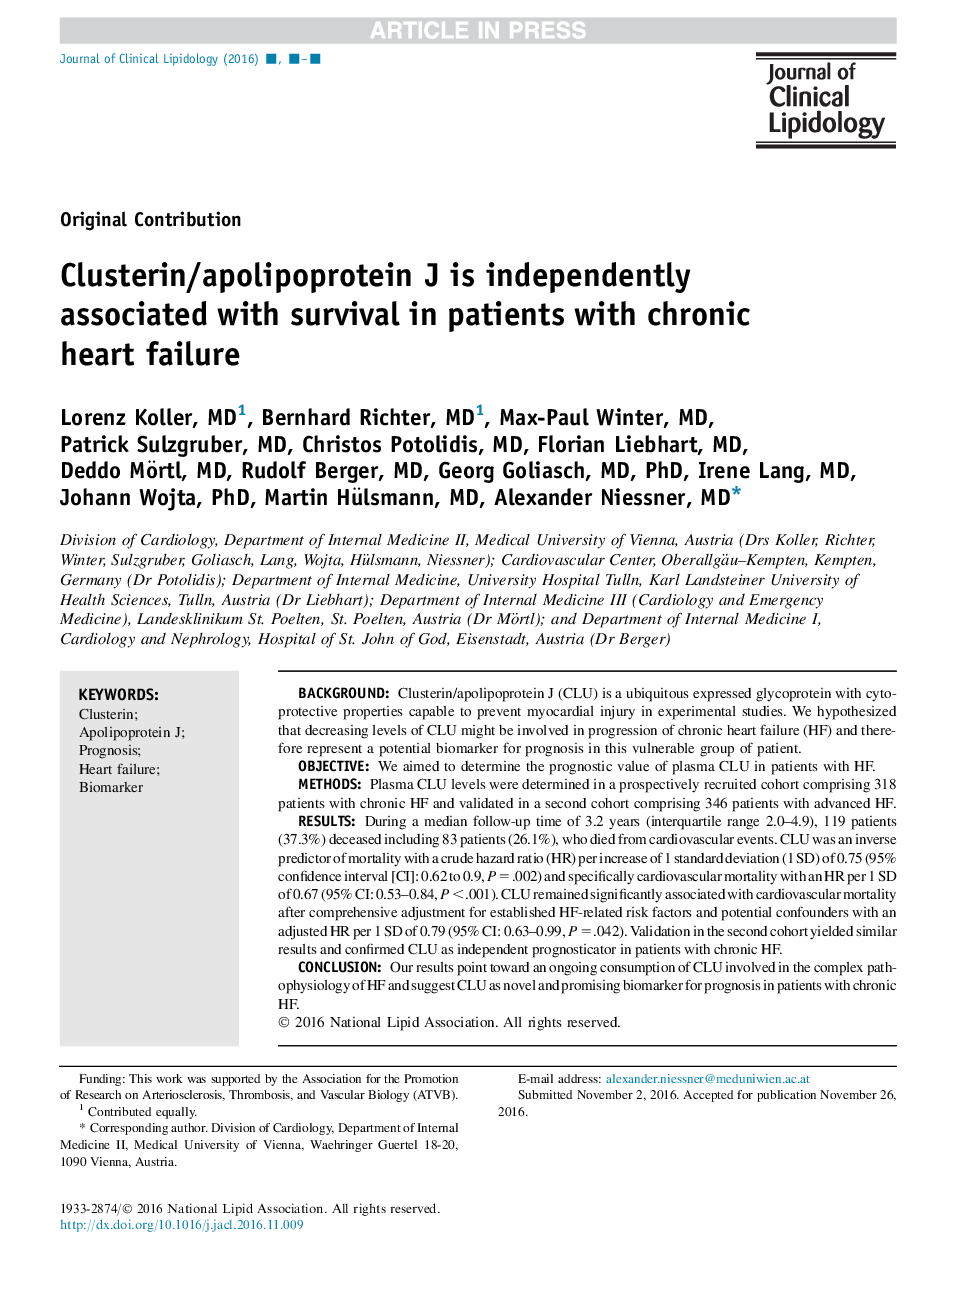 Clusterin/apolipoprotein J is independently associated with survival in patients with chronic heart failure